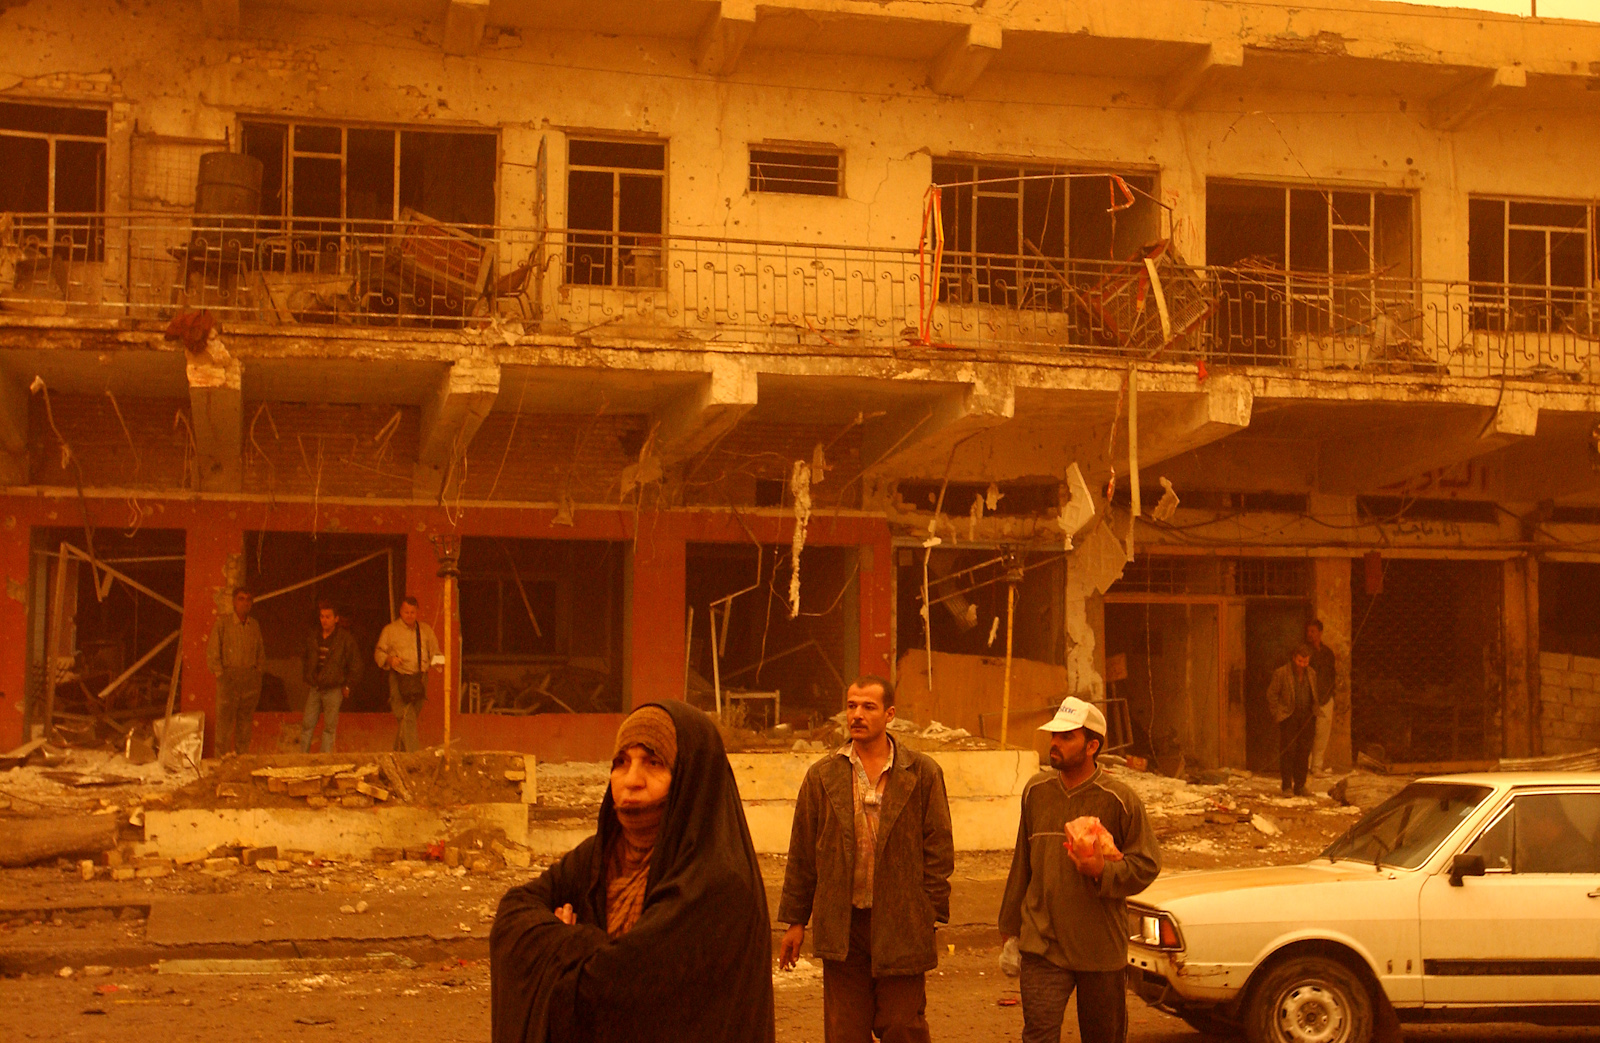 During a sandstorm, Iraqis stand in front of wreckage of a building in the days following the U.S. bombing campaign, Baghdad, Iraq, March 26, 2003.